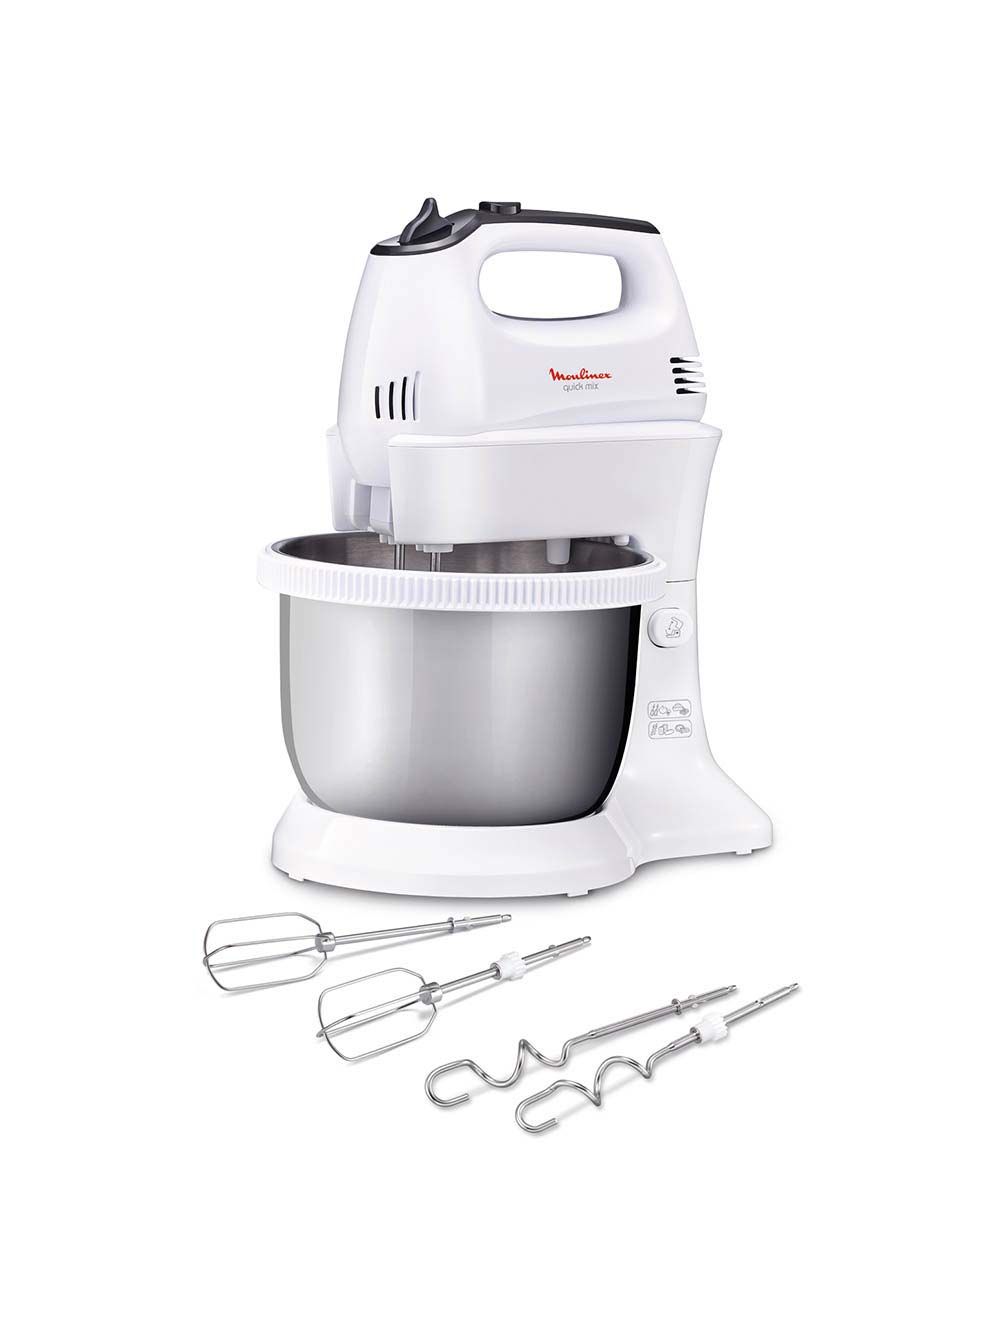 Moulinex Quick Mix Hand Mixer With 3.5 L Stand Bowl, HM312127